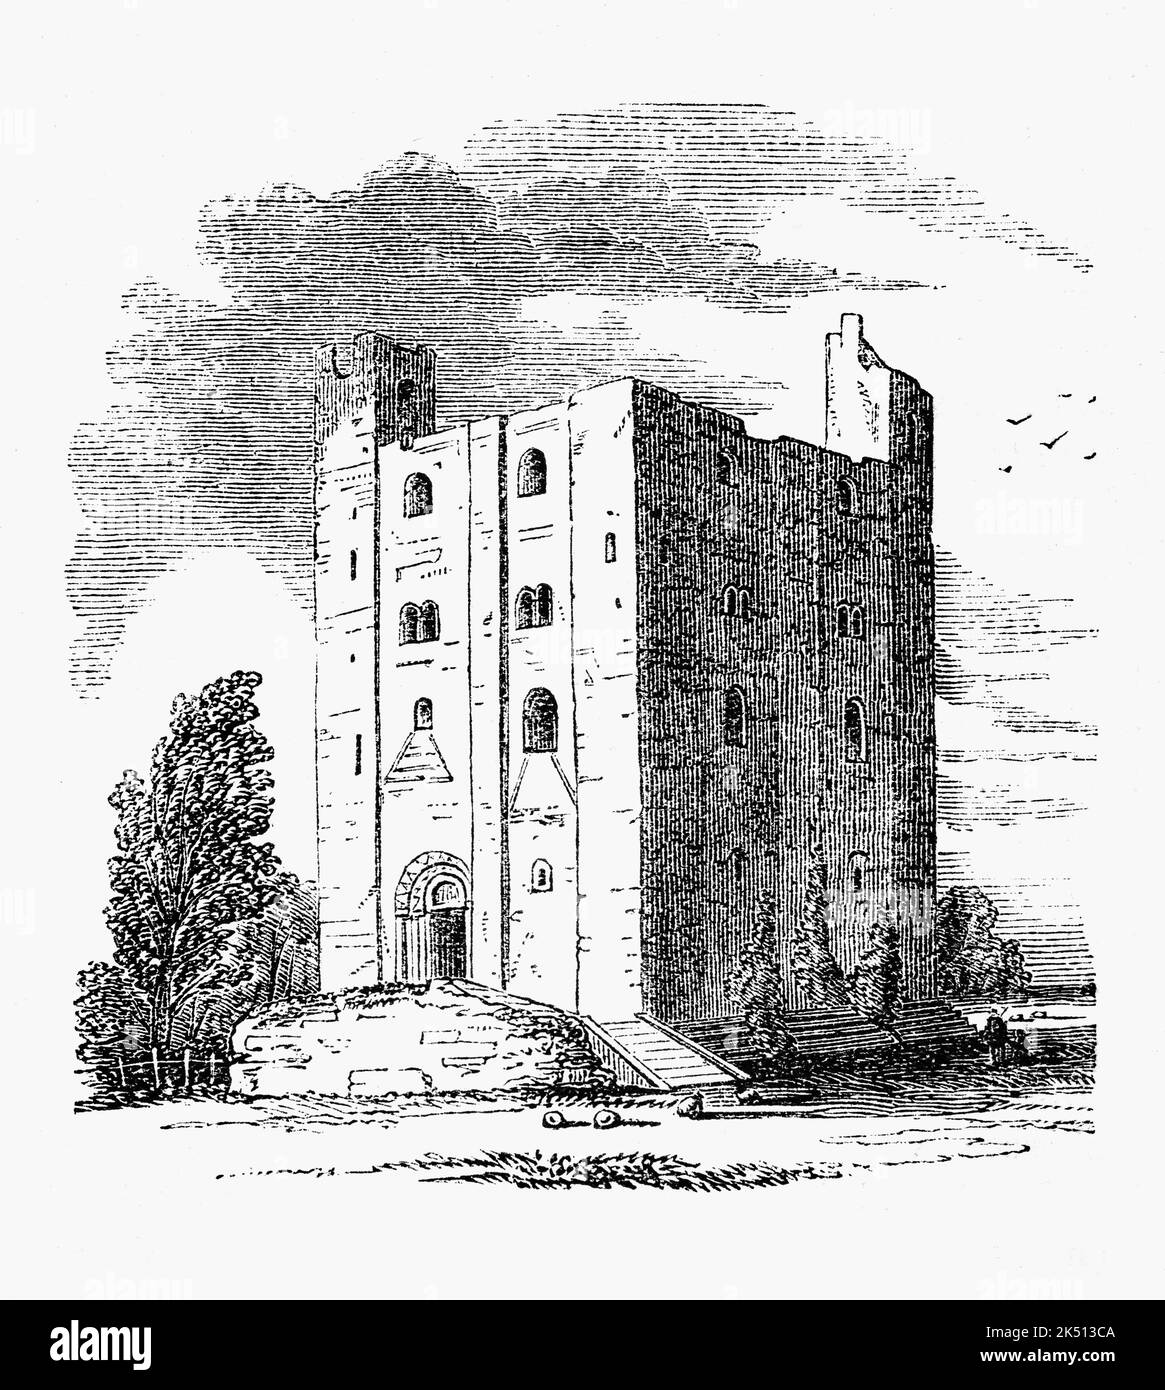 Hedingham Castle, in the village of Castle Hedingham, Essex, is arguably the best preserved Norman keep in England. The castle may occupy the site of an earlier castle believed to have been built in the late 11th or early 12th century by Aubrey de Vere I, a Norman baron. Matilda, wife of King Stephen, died at Castle Hedingham on 3 May 1152. The castle was besieged twice, in 1216 and 1217, during the dispute between King John, rebel barons, and the French prince. Stock Photo